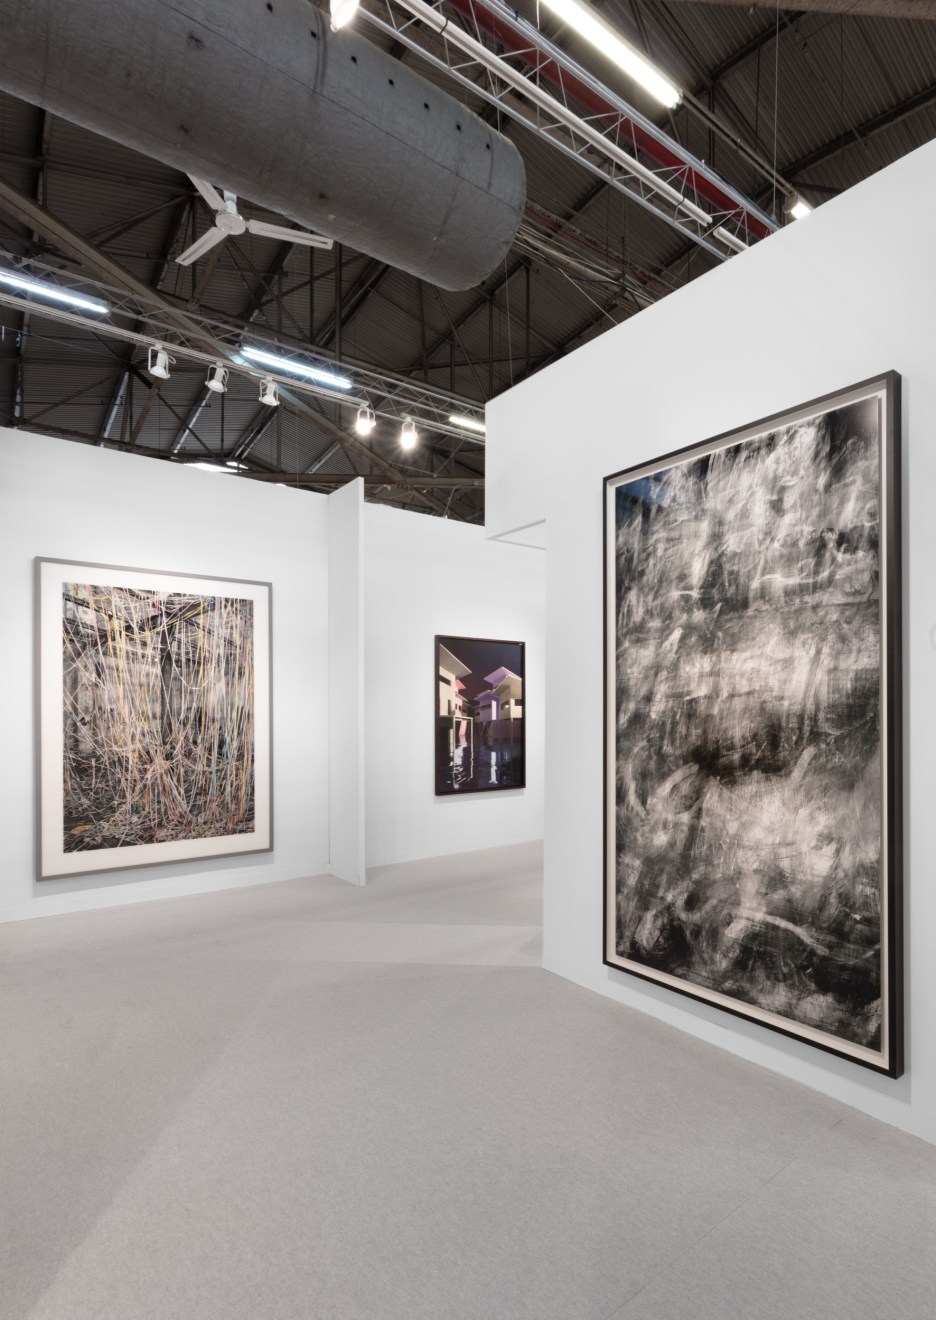 Sean Kelly at The Armory Show 2020, March 5&nbsp;- 8, 2020, Pier 94, Booth 501